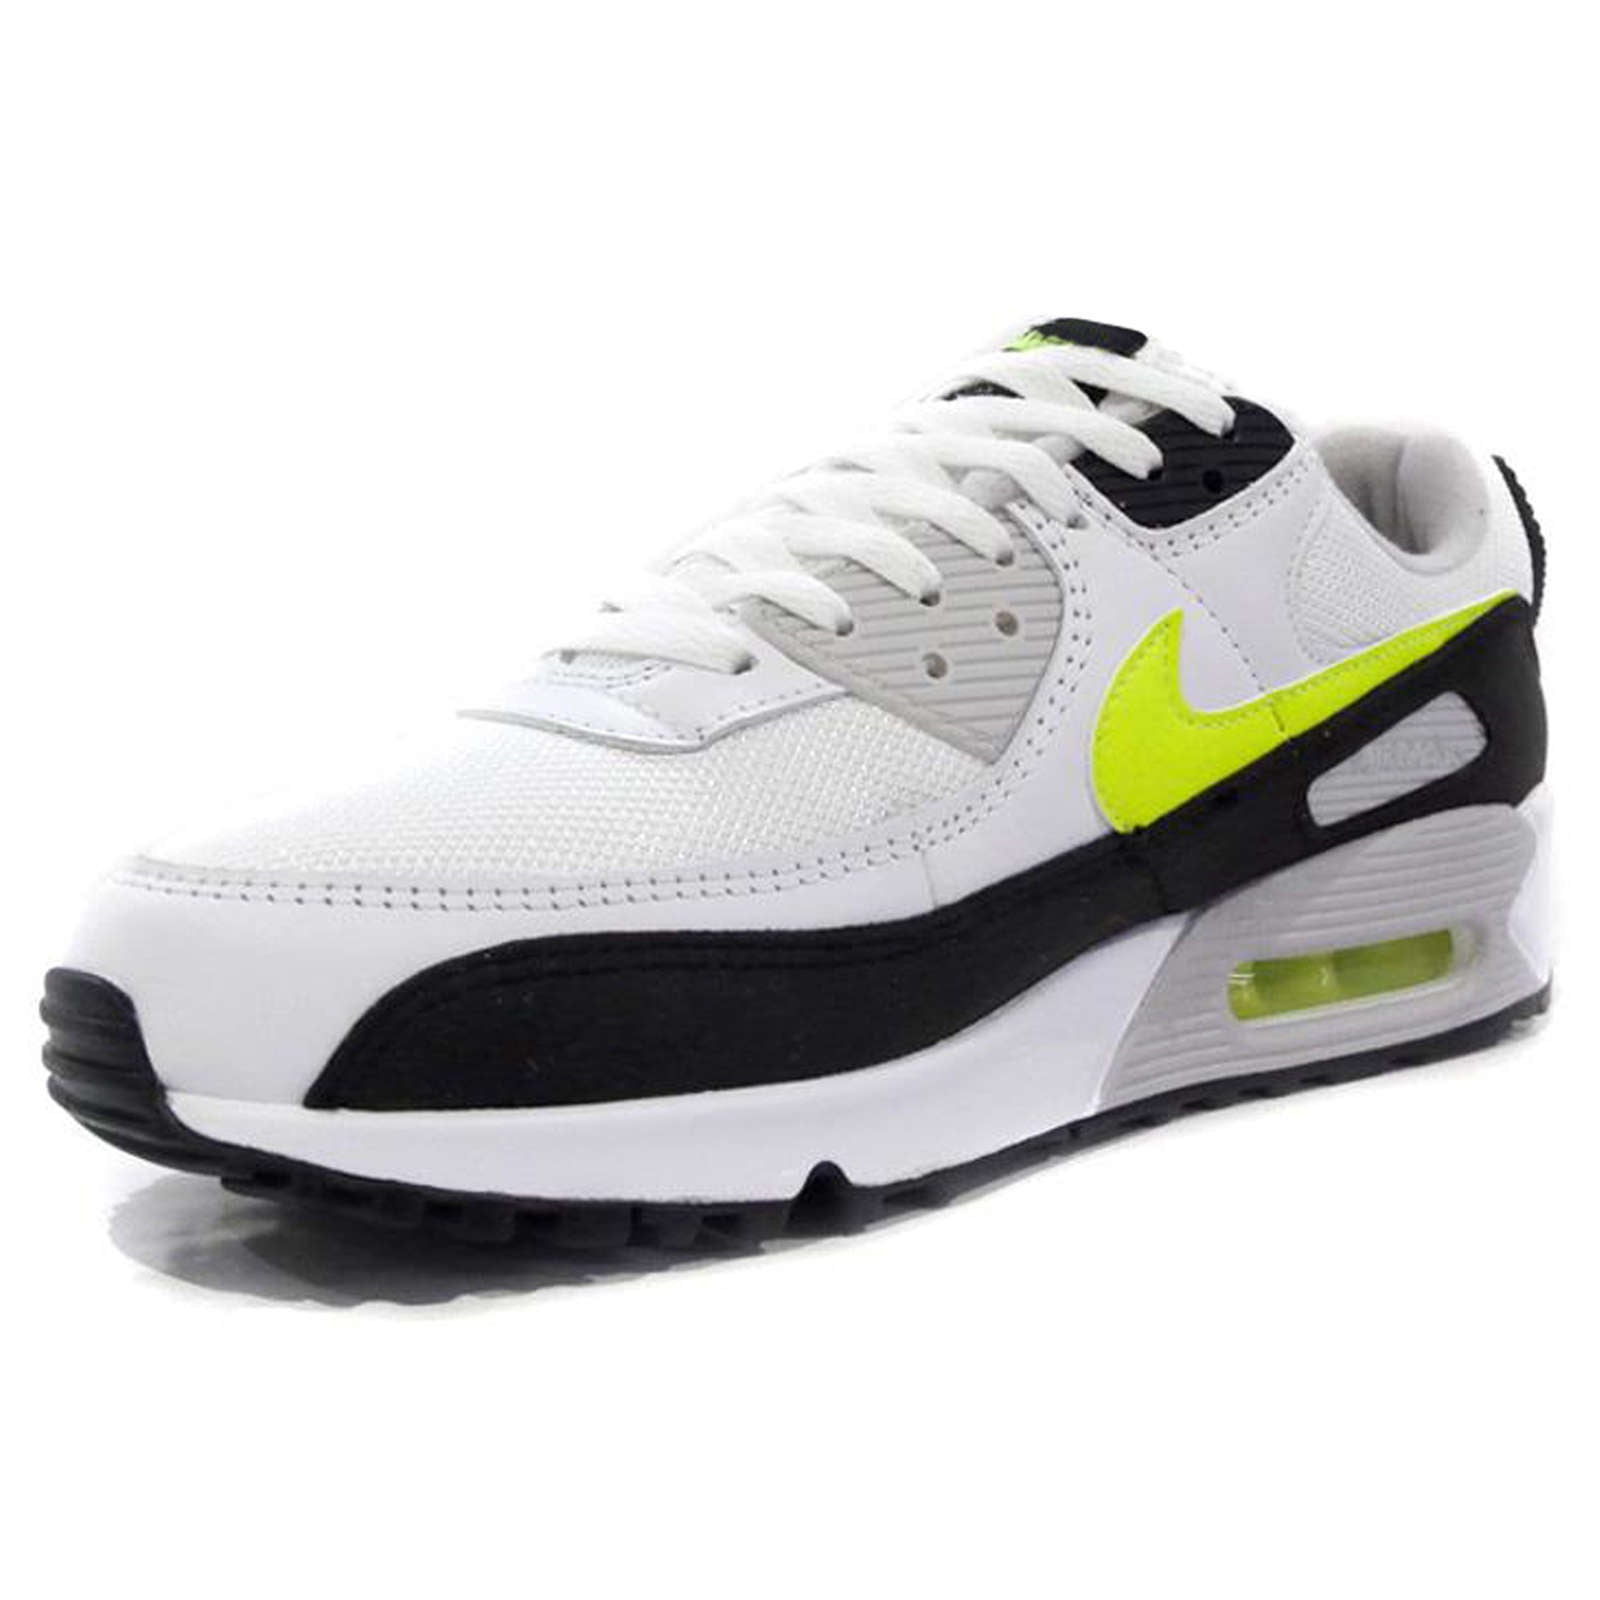 Nike Air Max 90 Leather Textile Unisex Low-Top Trainers#color_white hot lime black